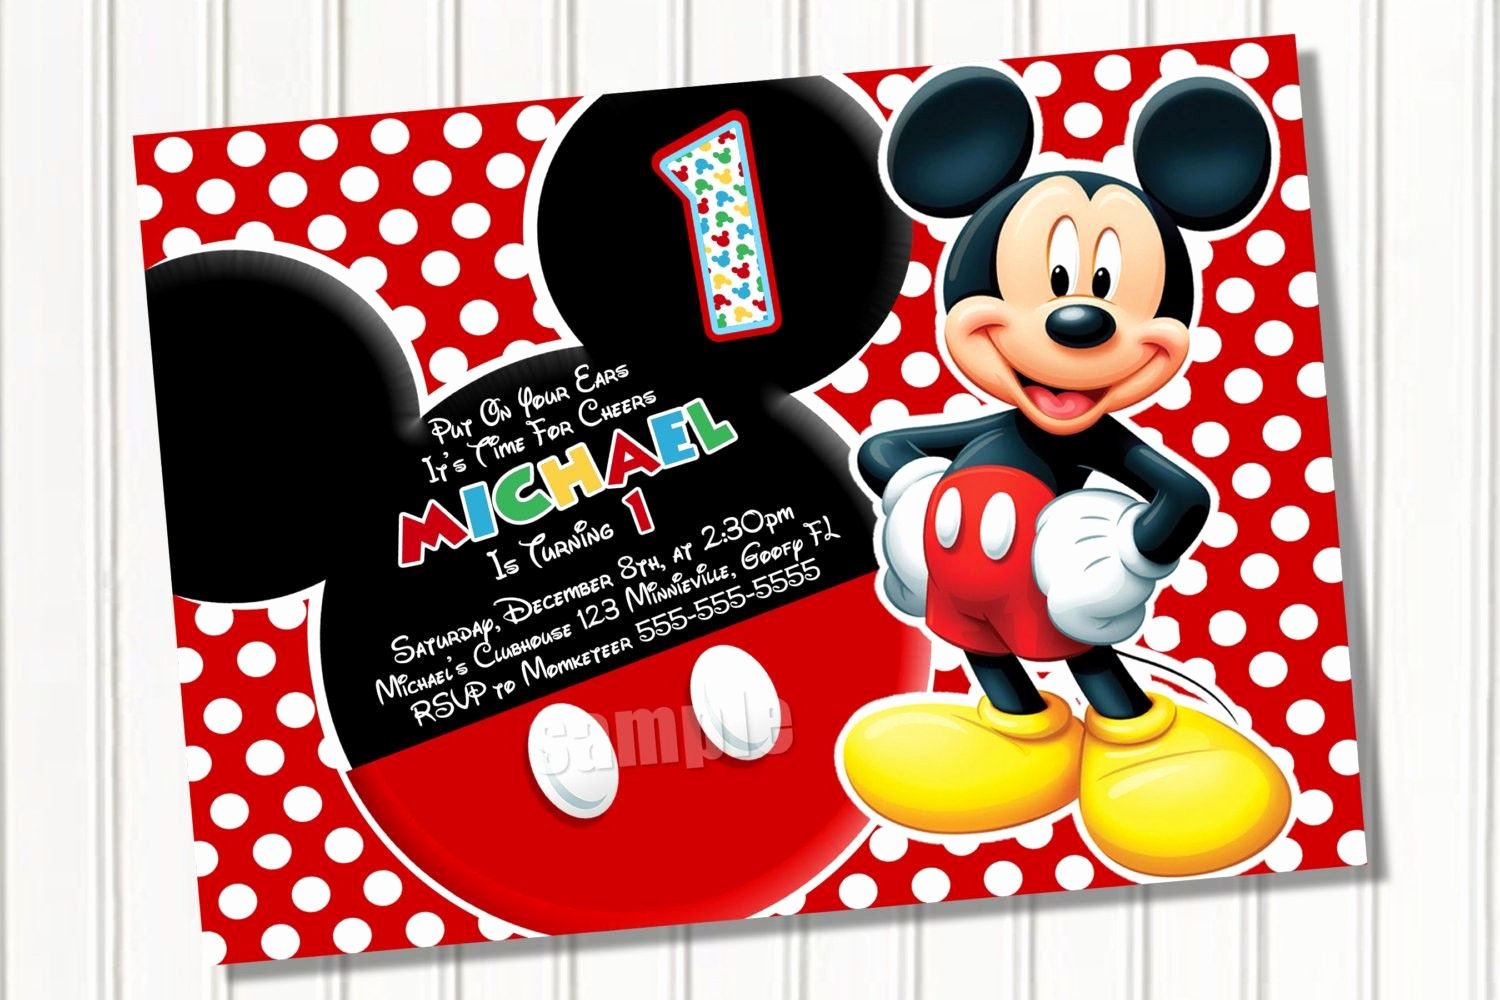 Free Mickey Mouse Invitations Personalized Awesome Free Printable Mickey Mouse 1st Birthday Party Invitations israel Lopez Jr In 2019